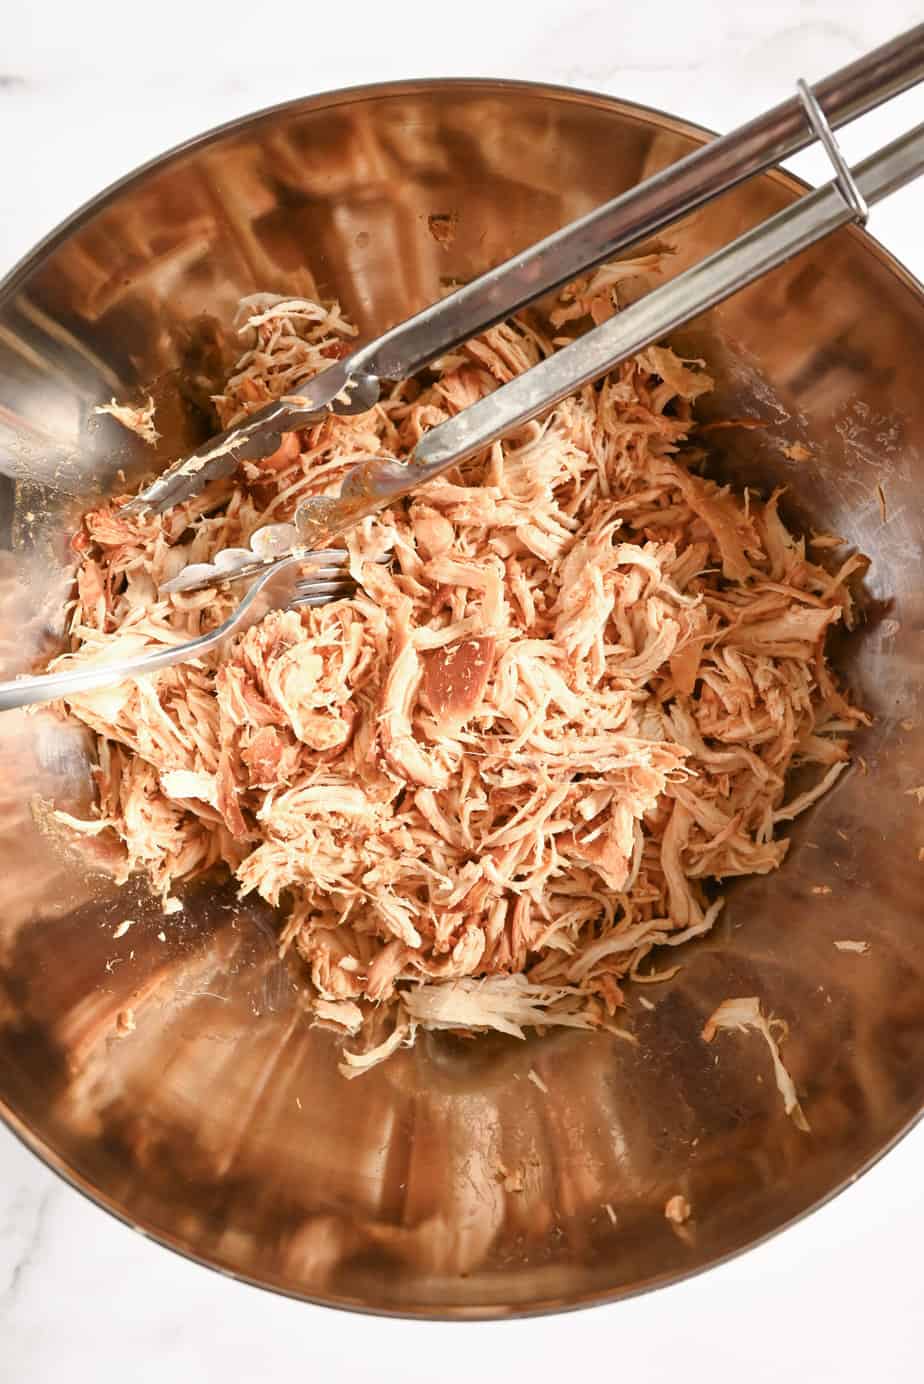 Shredded slow cooked chicken in a metal bowl with a pair of tongs.